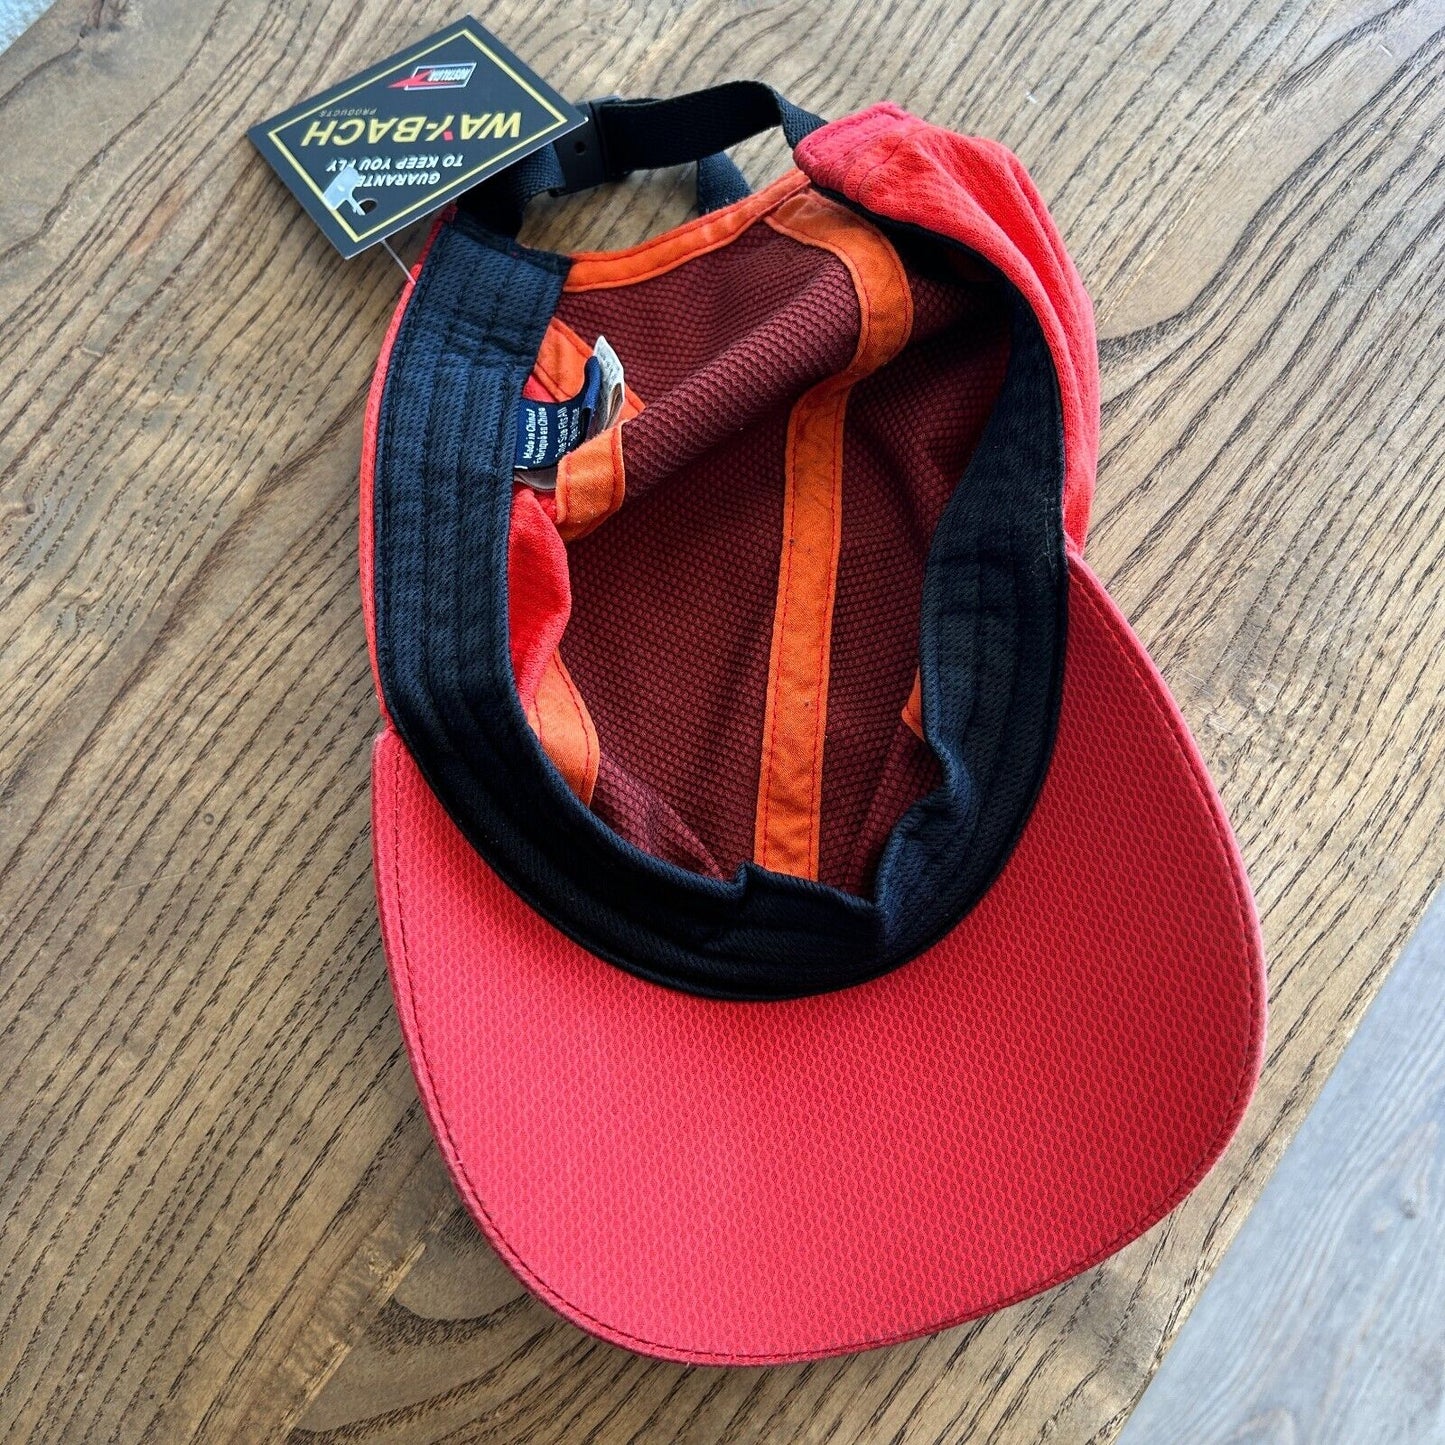 VINTAGE | ARC'TERYX 4 Panel Red Mesh Cycling Cap HAT One Size Adult